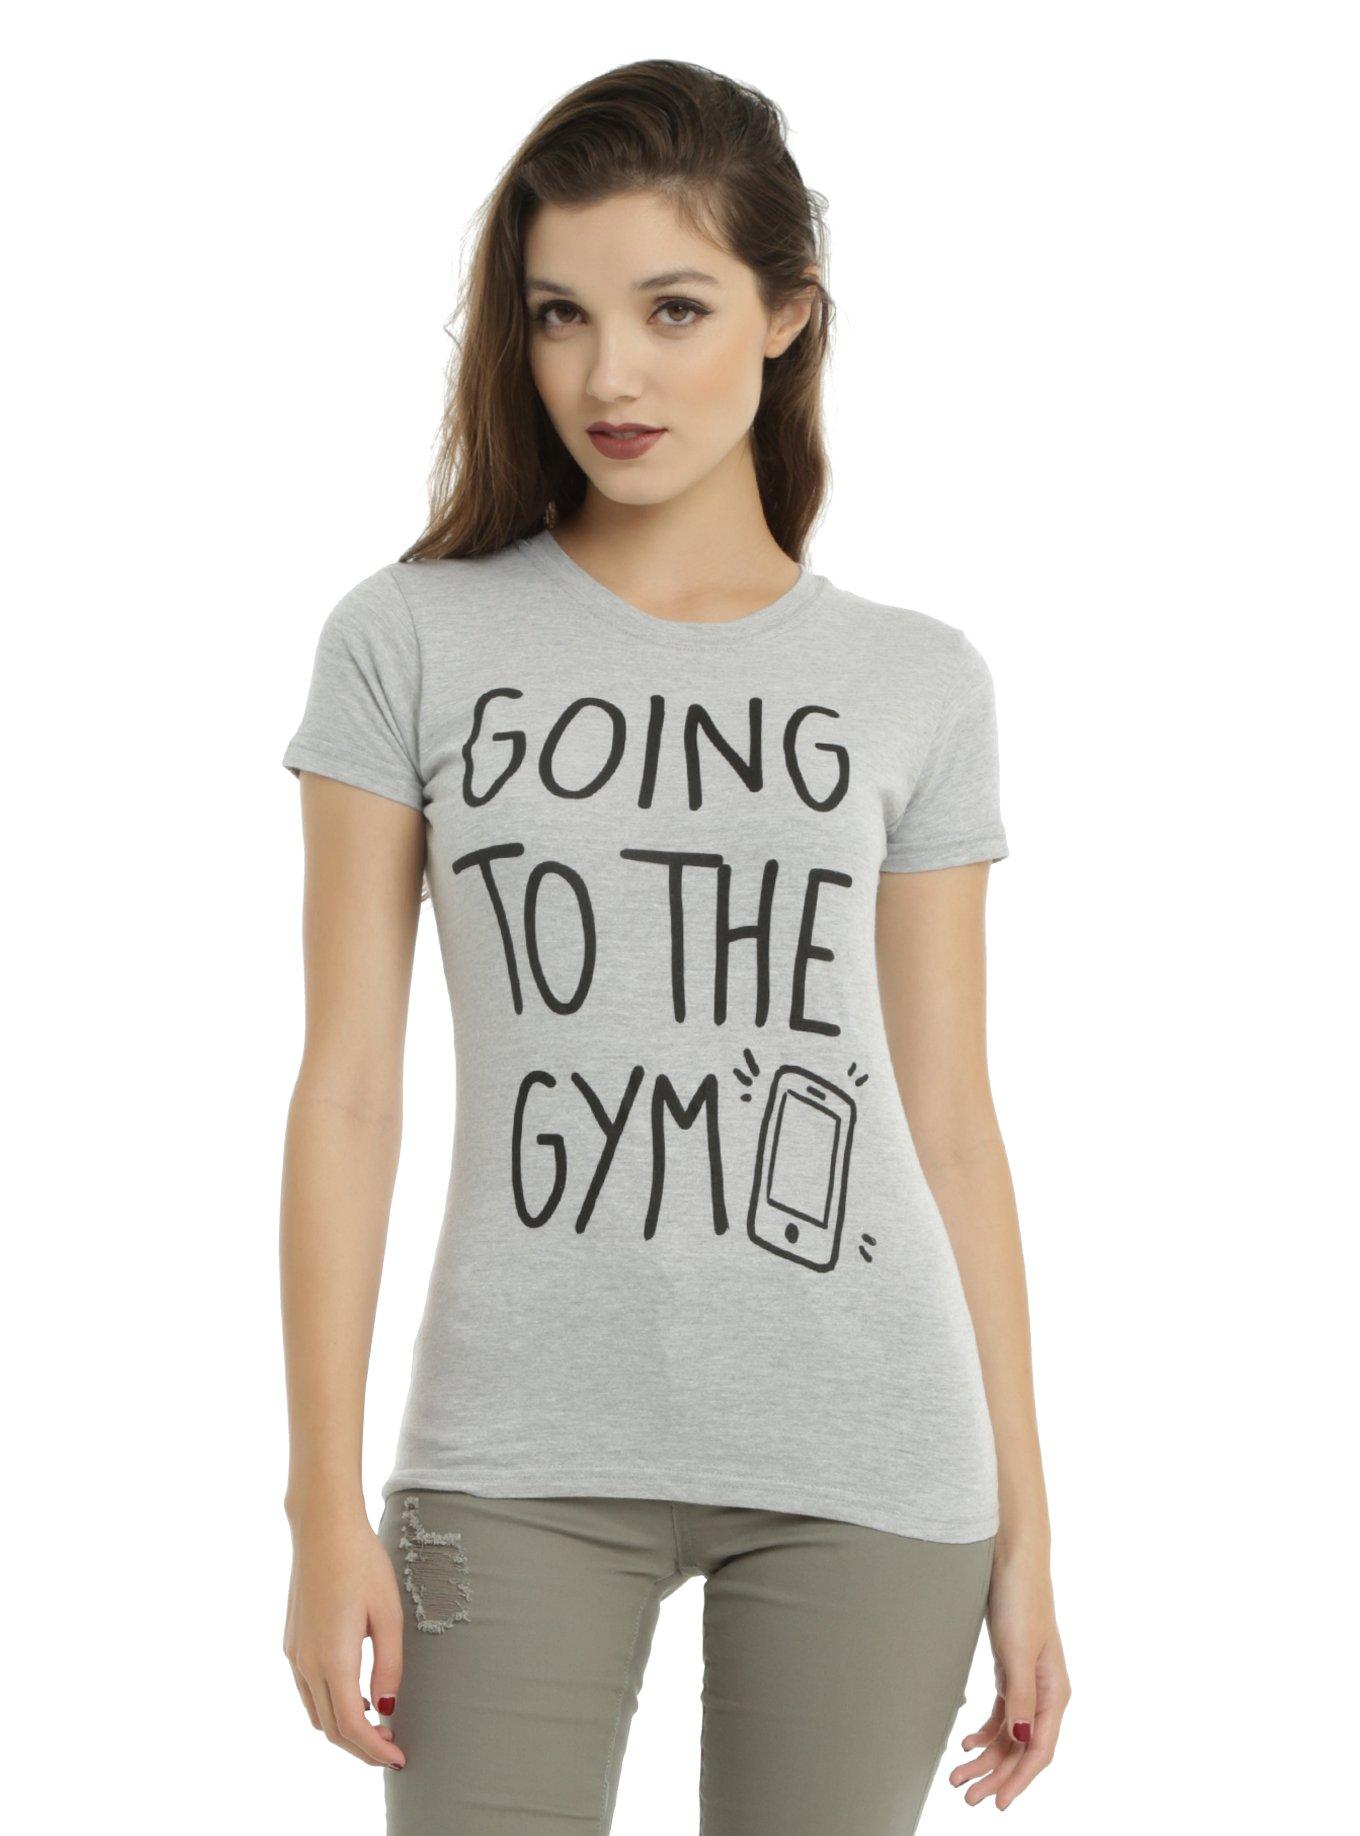 Going To The Gym Girls T-Shirt, GREY, hi-res